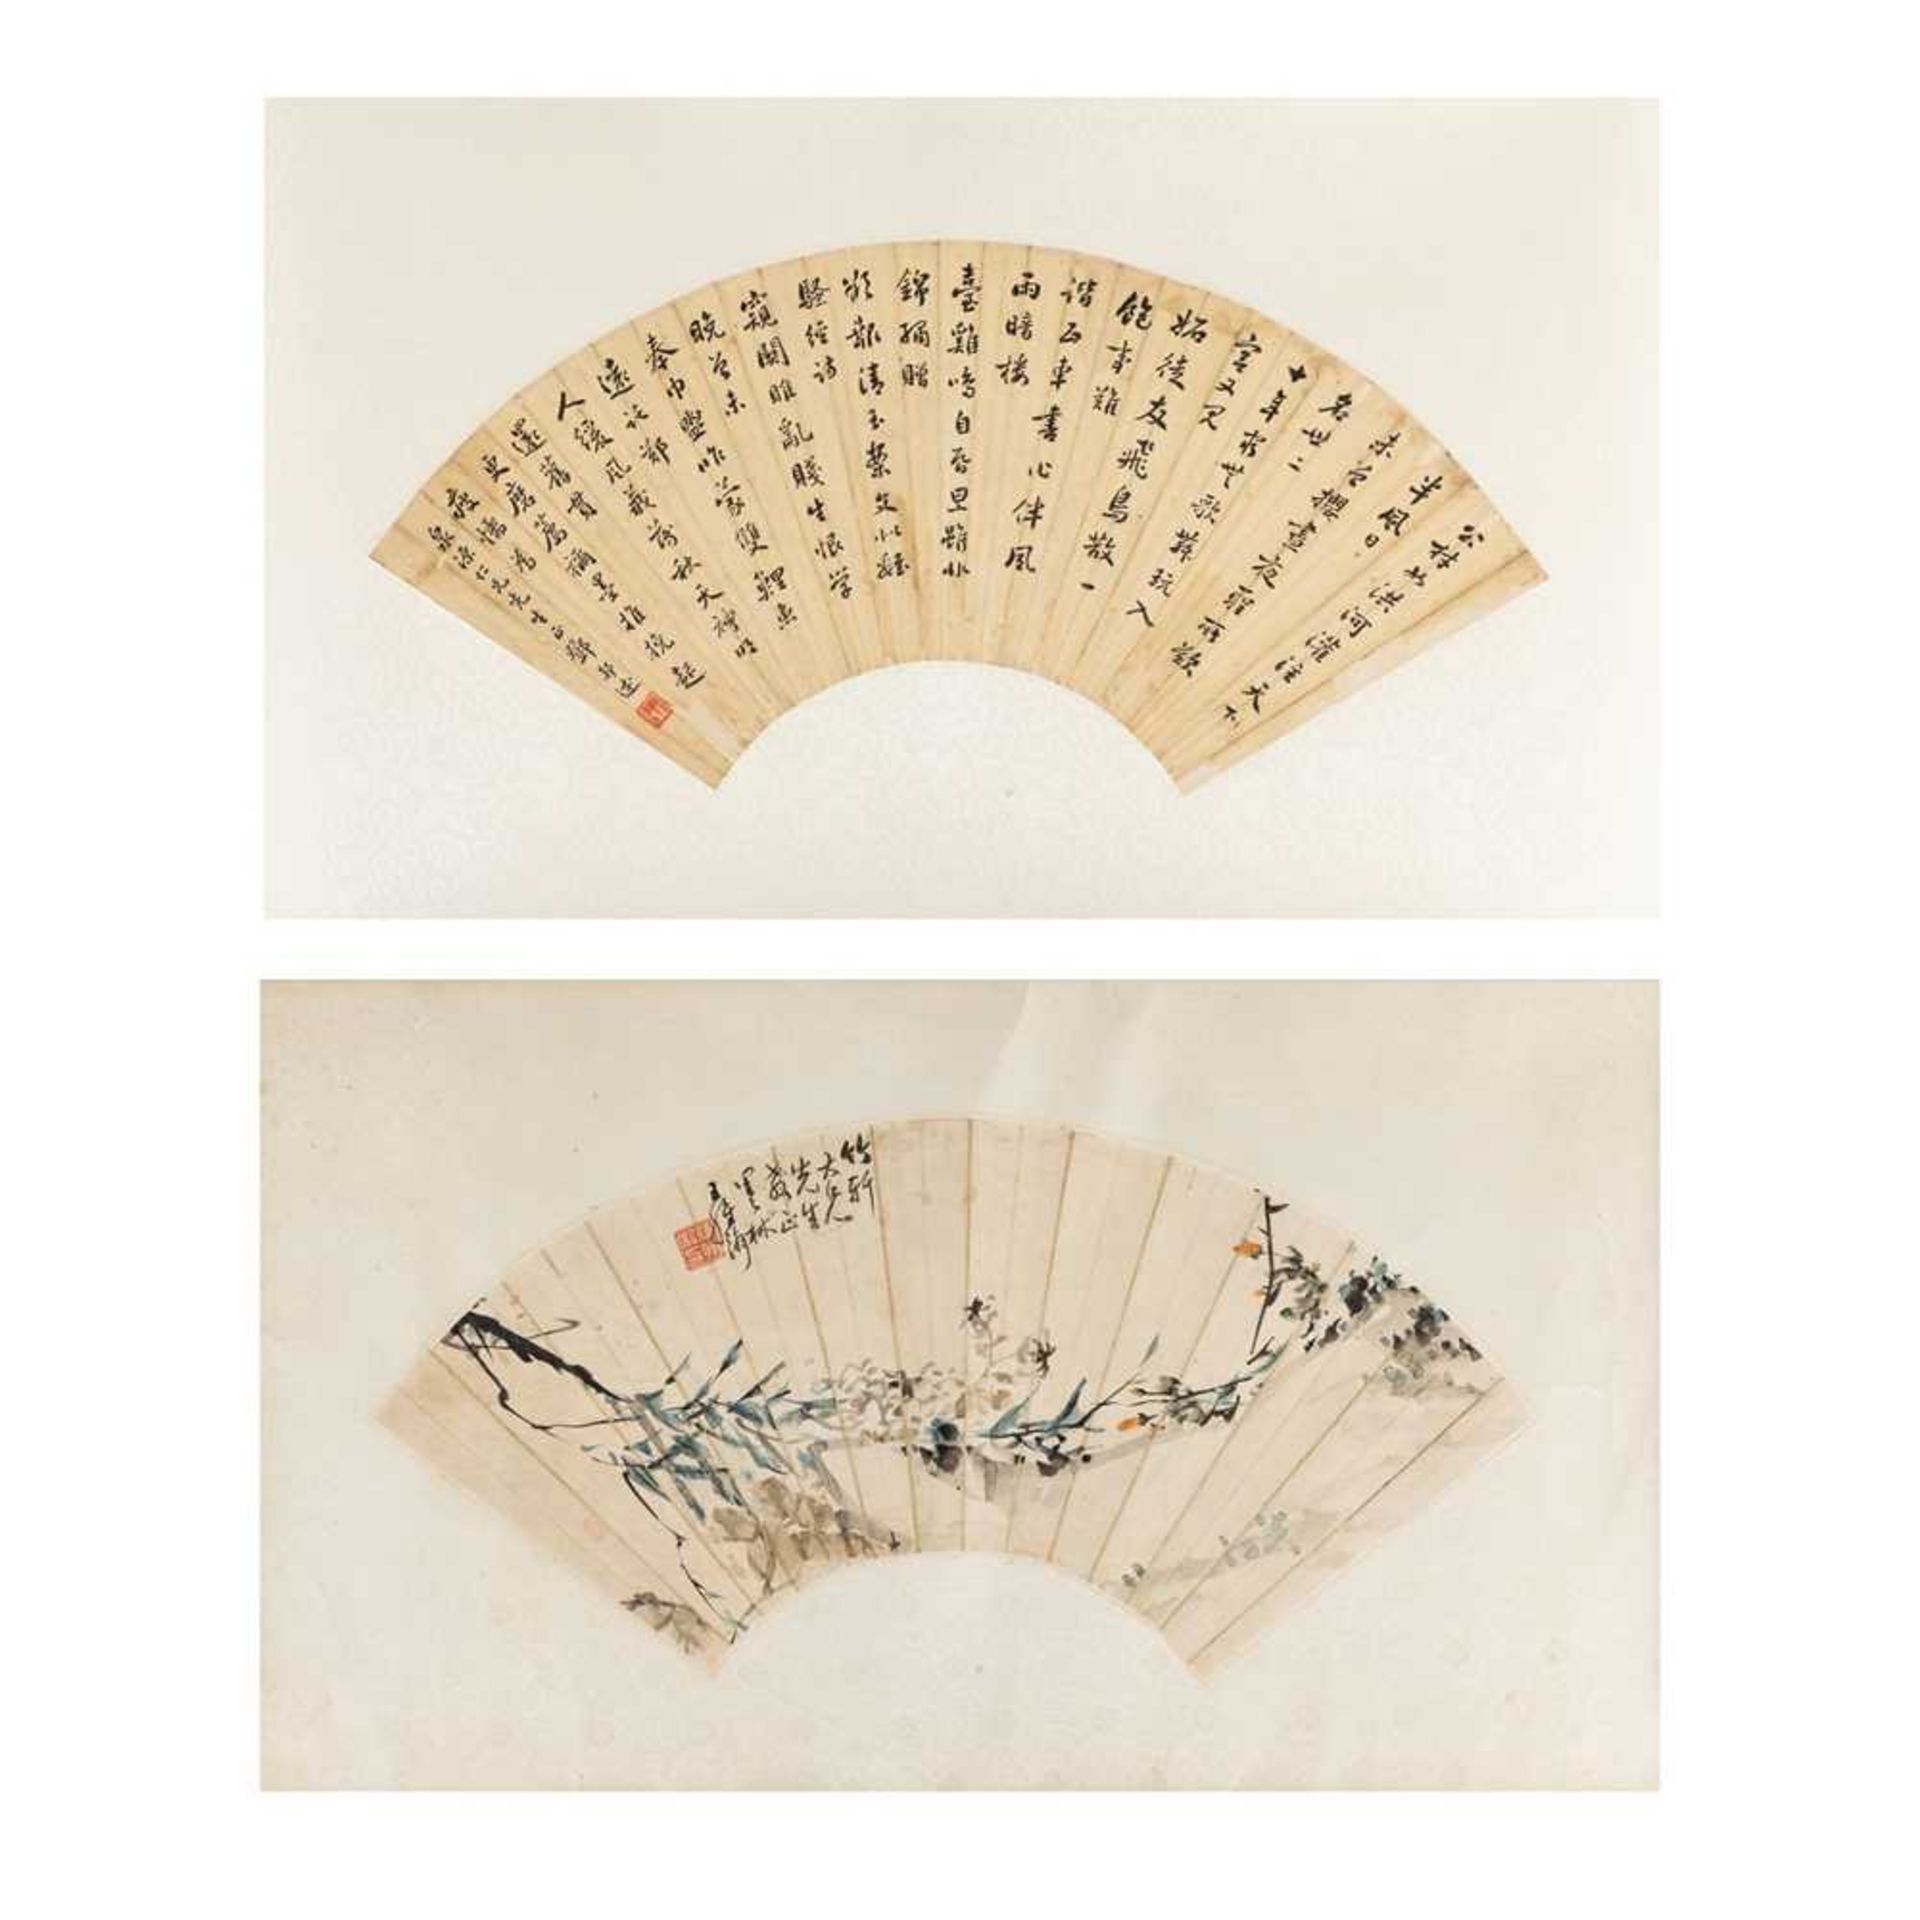 AN INK FAN LEAF CALLIGRAPHY AND A PAINTING ATTRIBUTED TO DENG BANGSHU (1868-1939) AND WANG WEIHAN (C